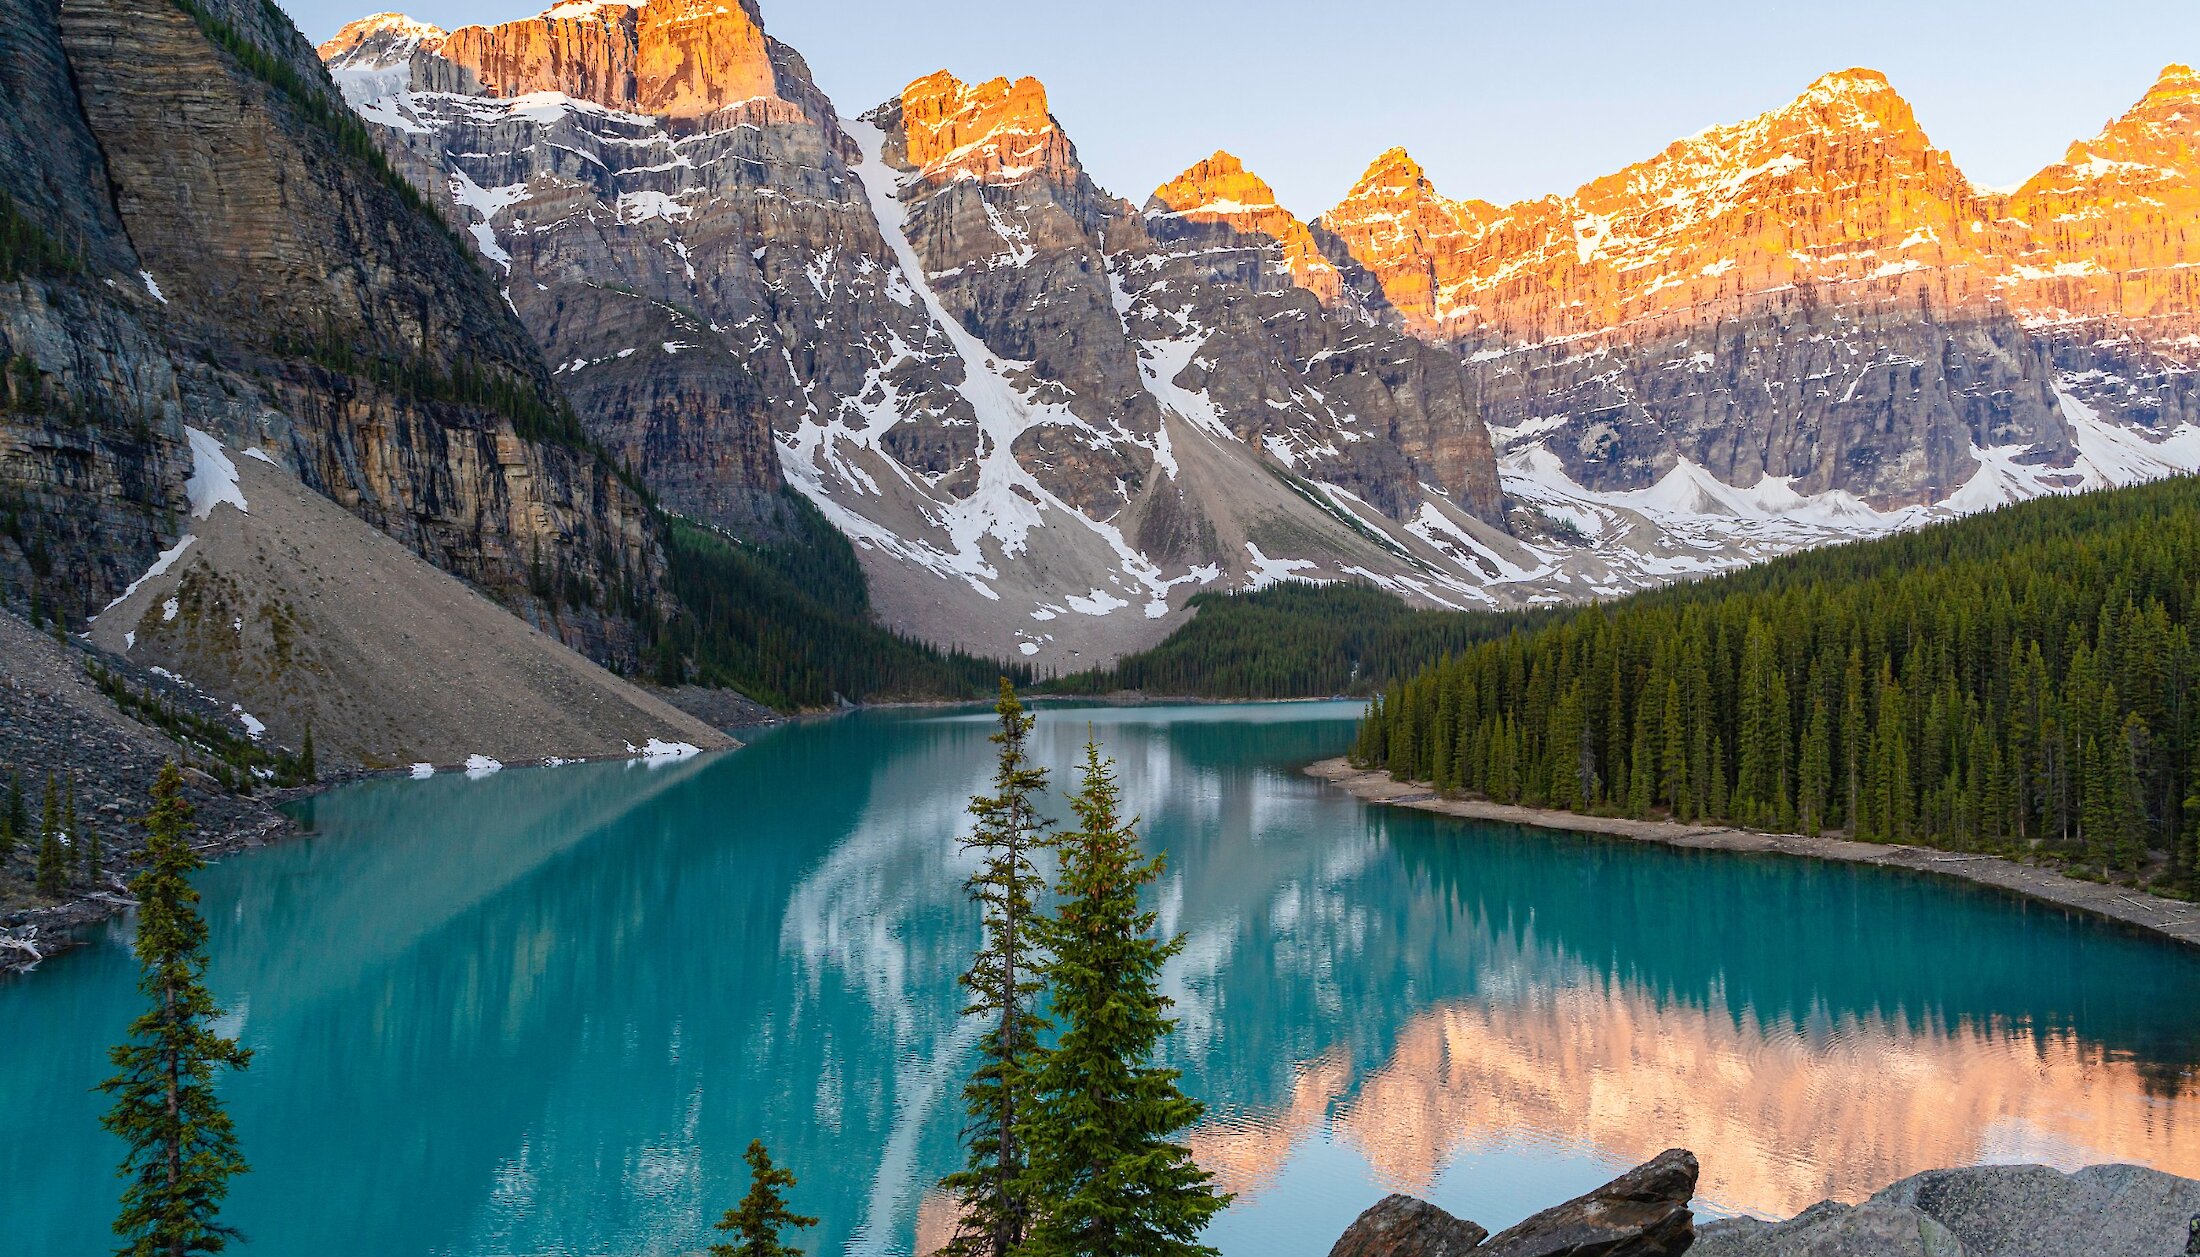 Sunrise at Moraine Lake when the mountains glow and turquoise water glitters